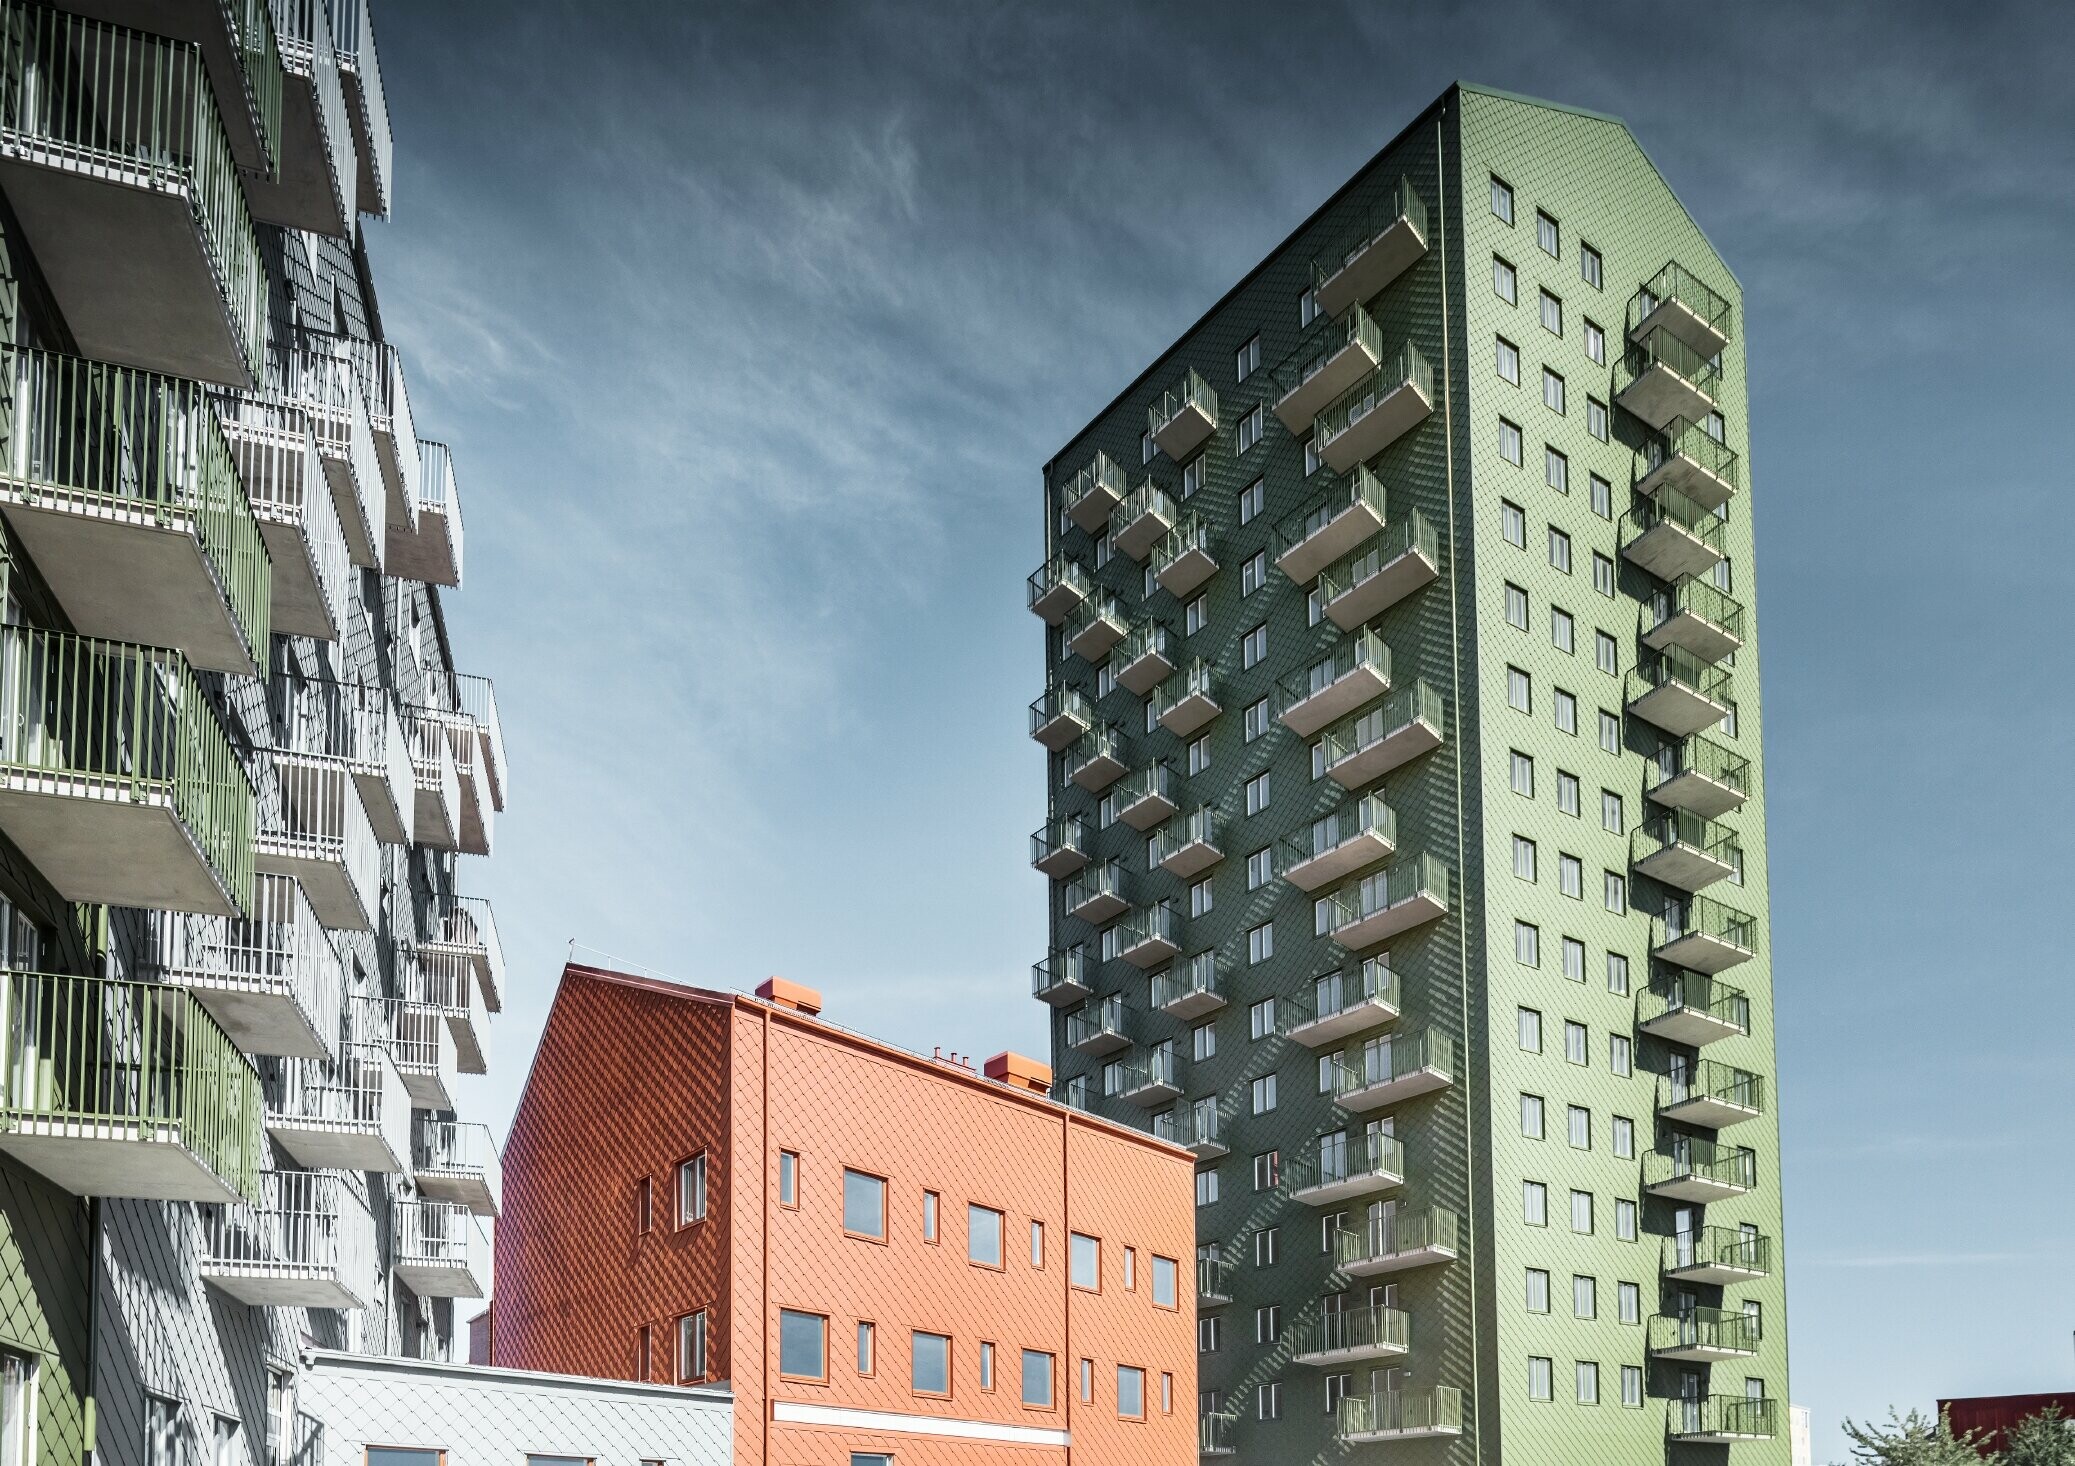 Multiple residential buildings clad in the PREFA 29 x 29 rhomboid façade tile in the colours olive green, brick red and light grey in Gothenburg, Sweden.